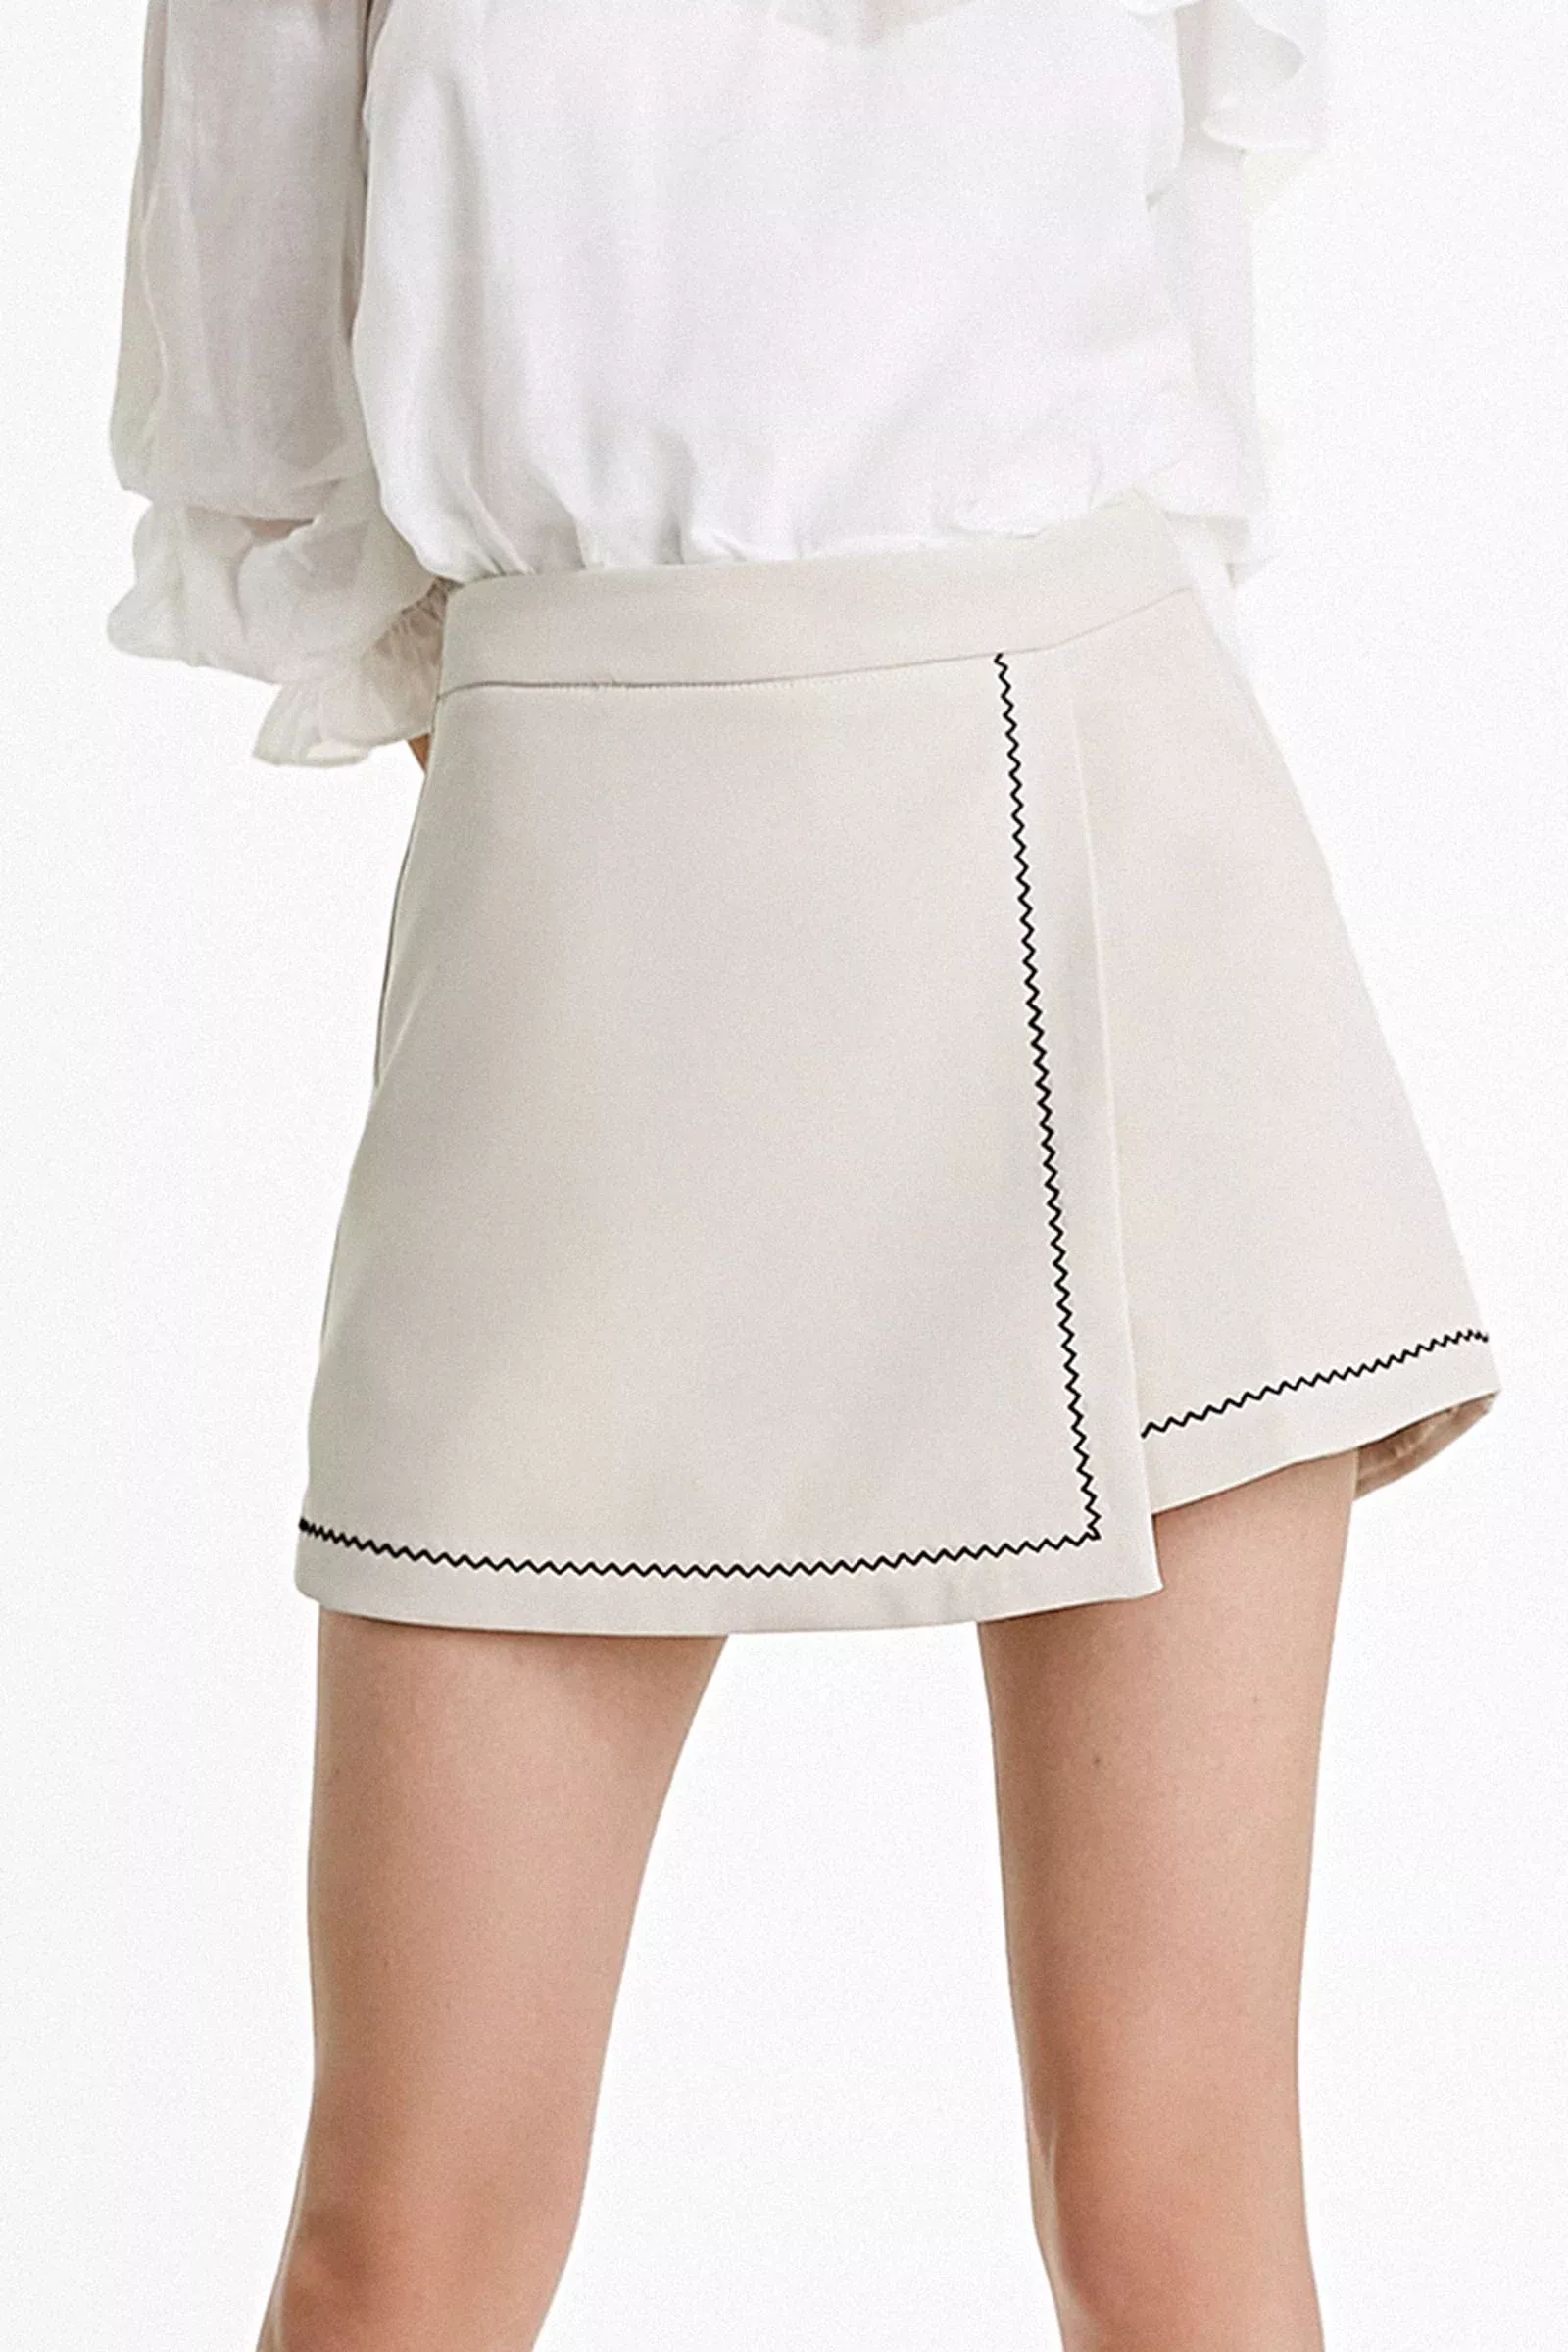 Casual Summer Skort Outfit - YesMissy